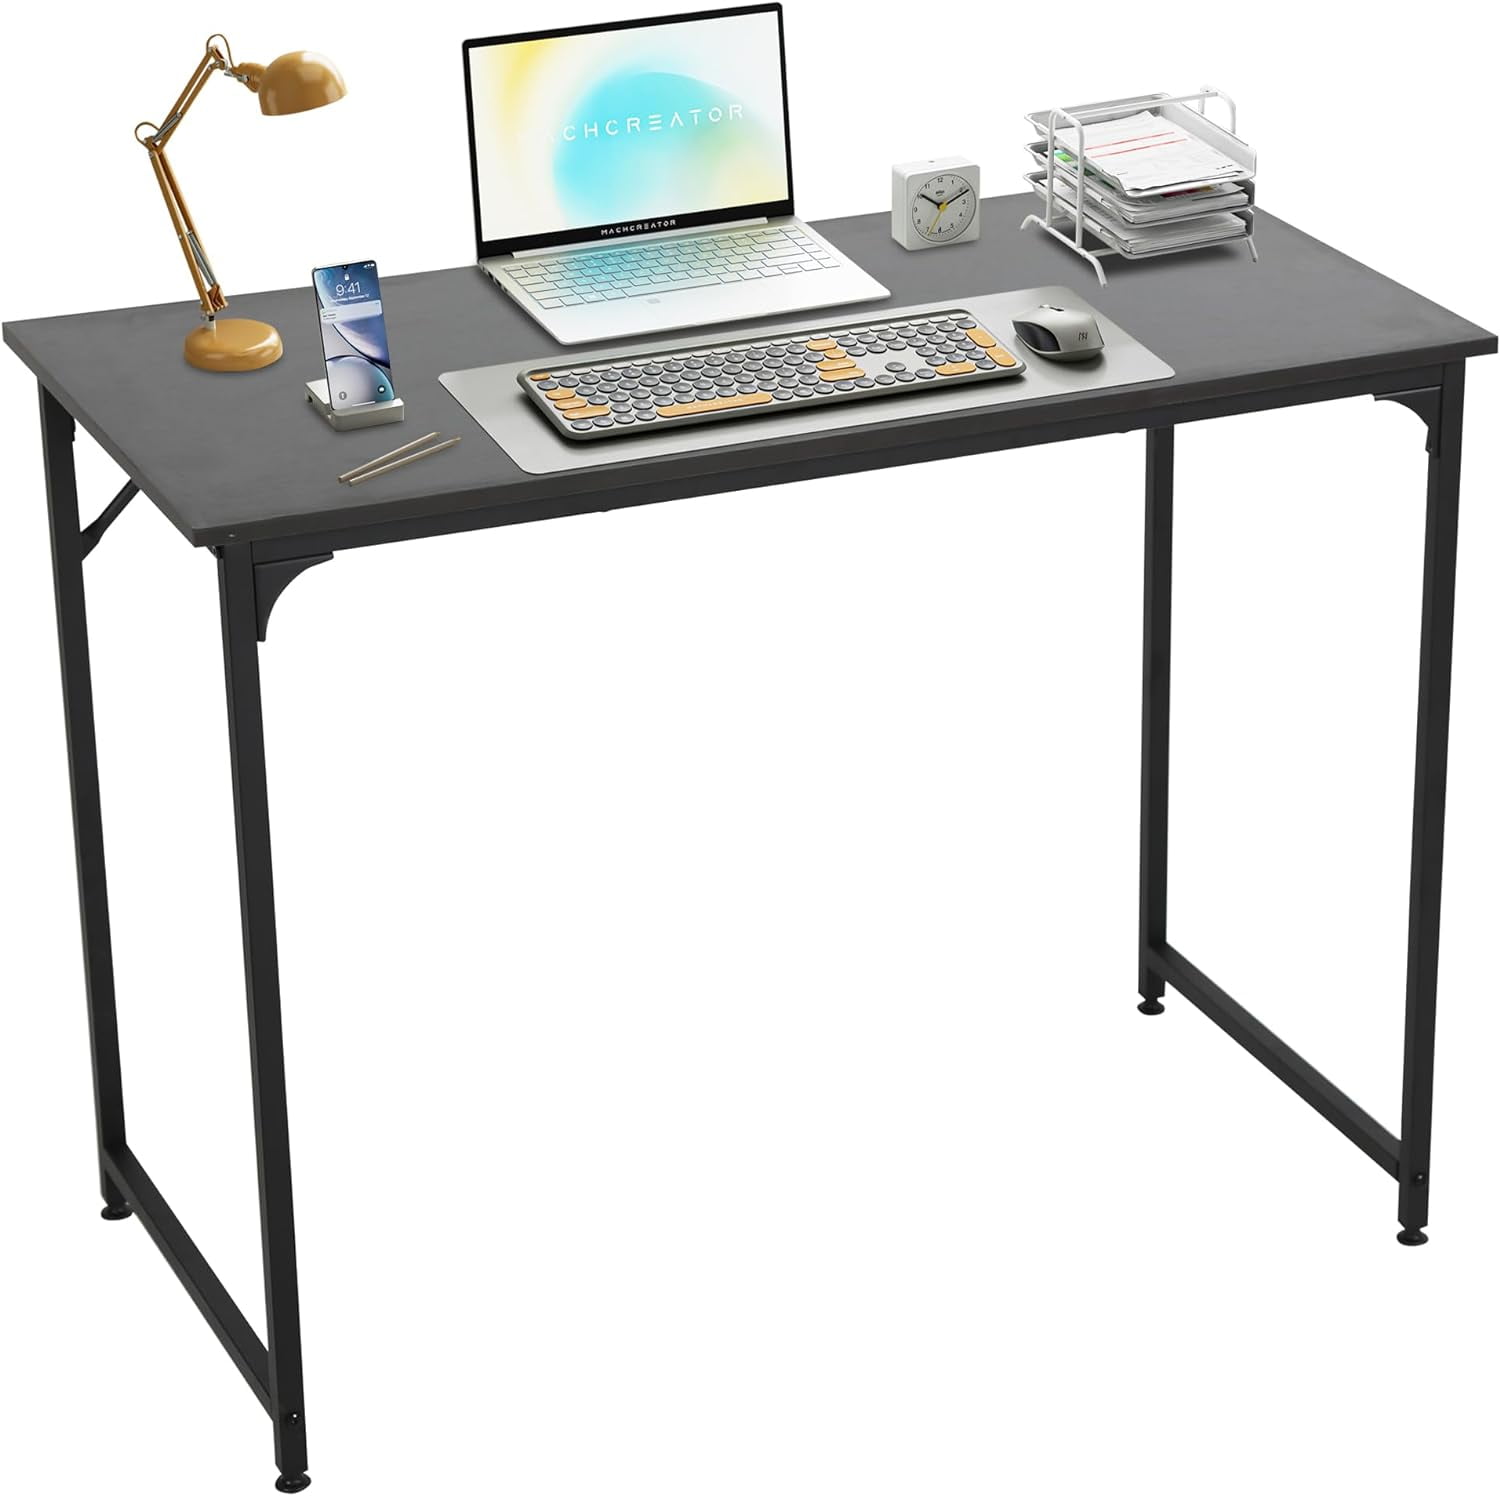 PayLessHere 39 inch Computer Desk Modern Writing Desk, Simple Study ...